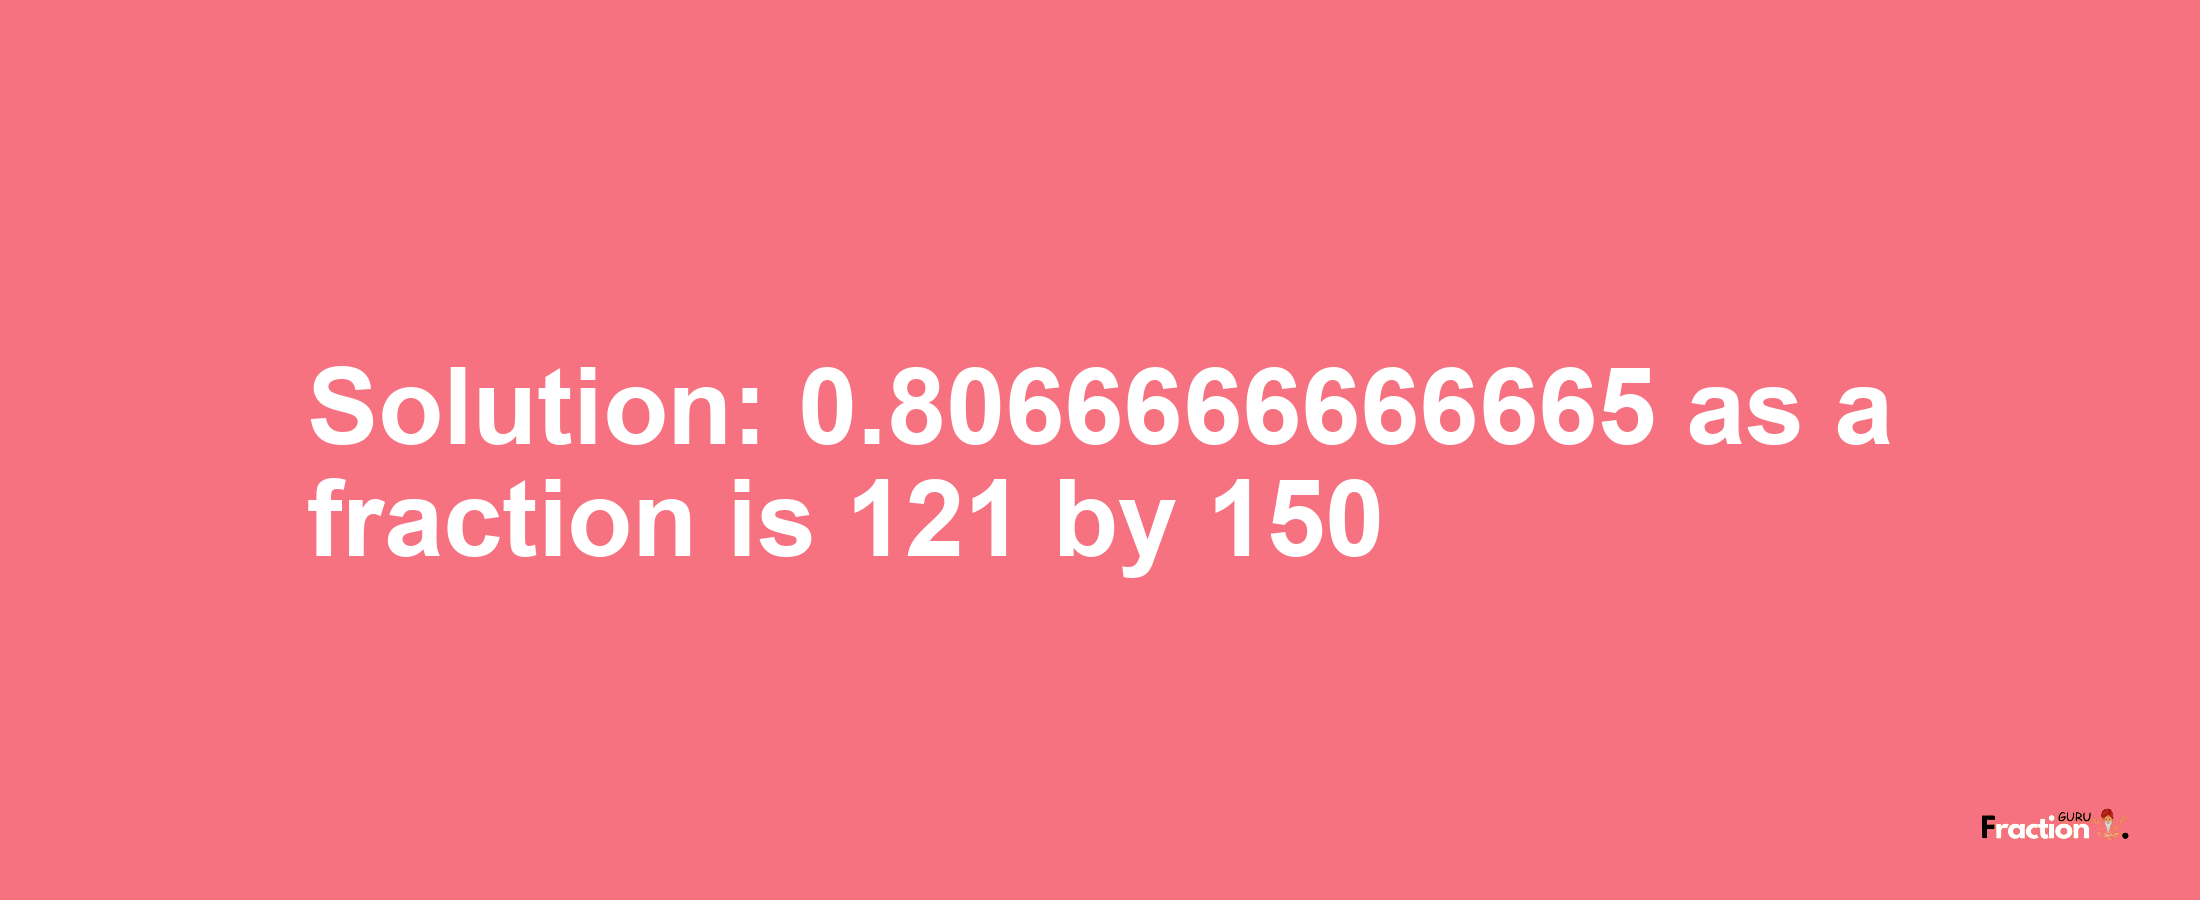 Solution:0.8066666666665 as a fraction is 121/150